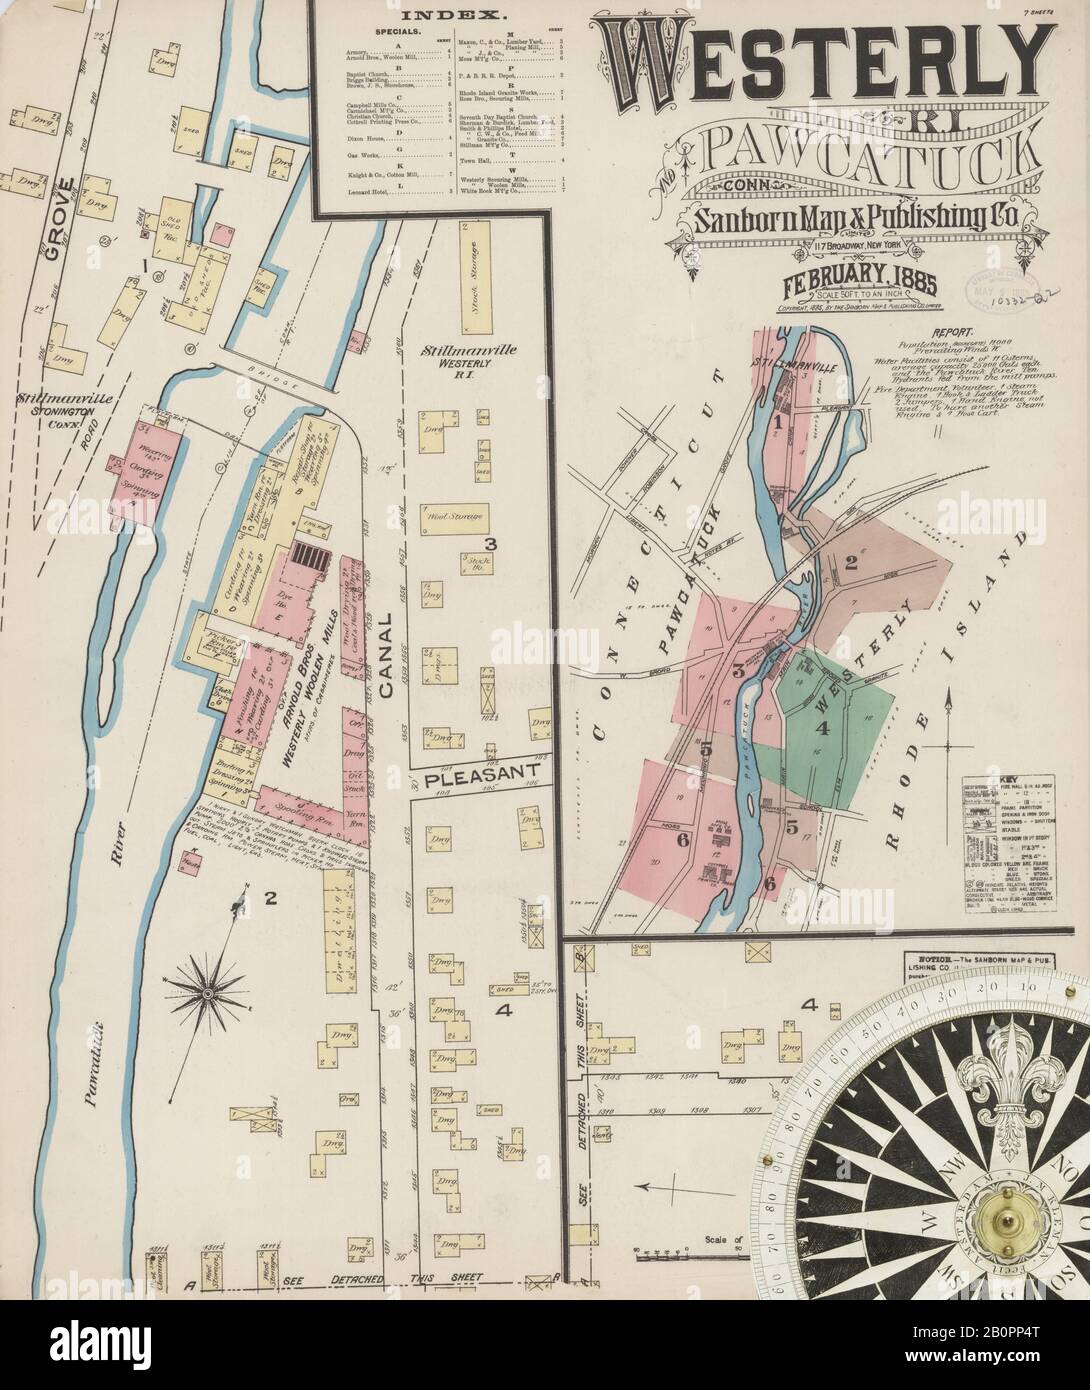 Image 1 of Sanborn Fire Insurance Map from Westerly, Washington County, Rhode Island. Feb 1885. 7 Sheet(s), America, street map with a Nineteenth Century compass Stock Photo